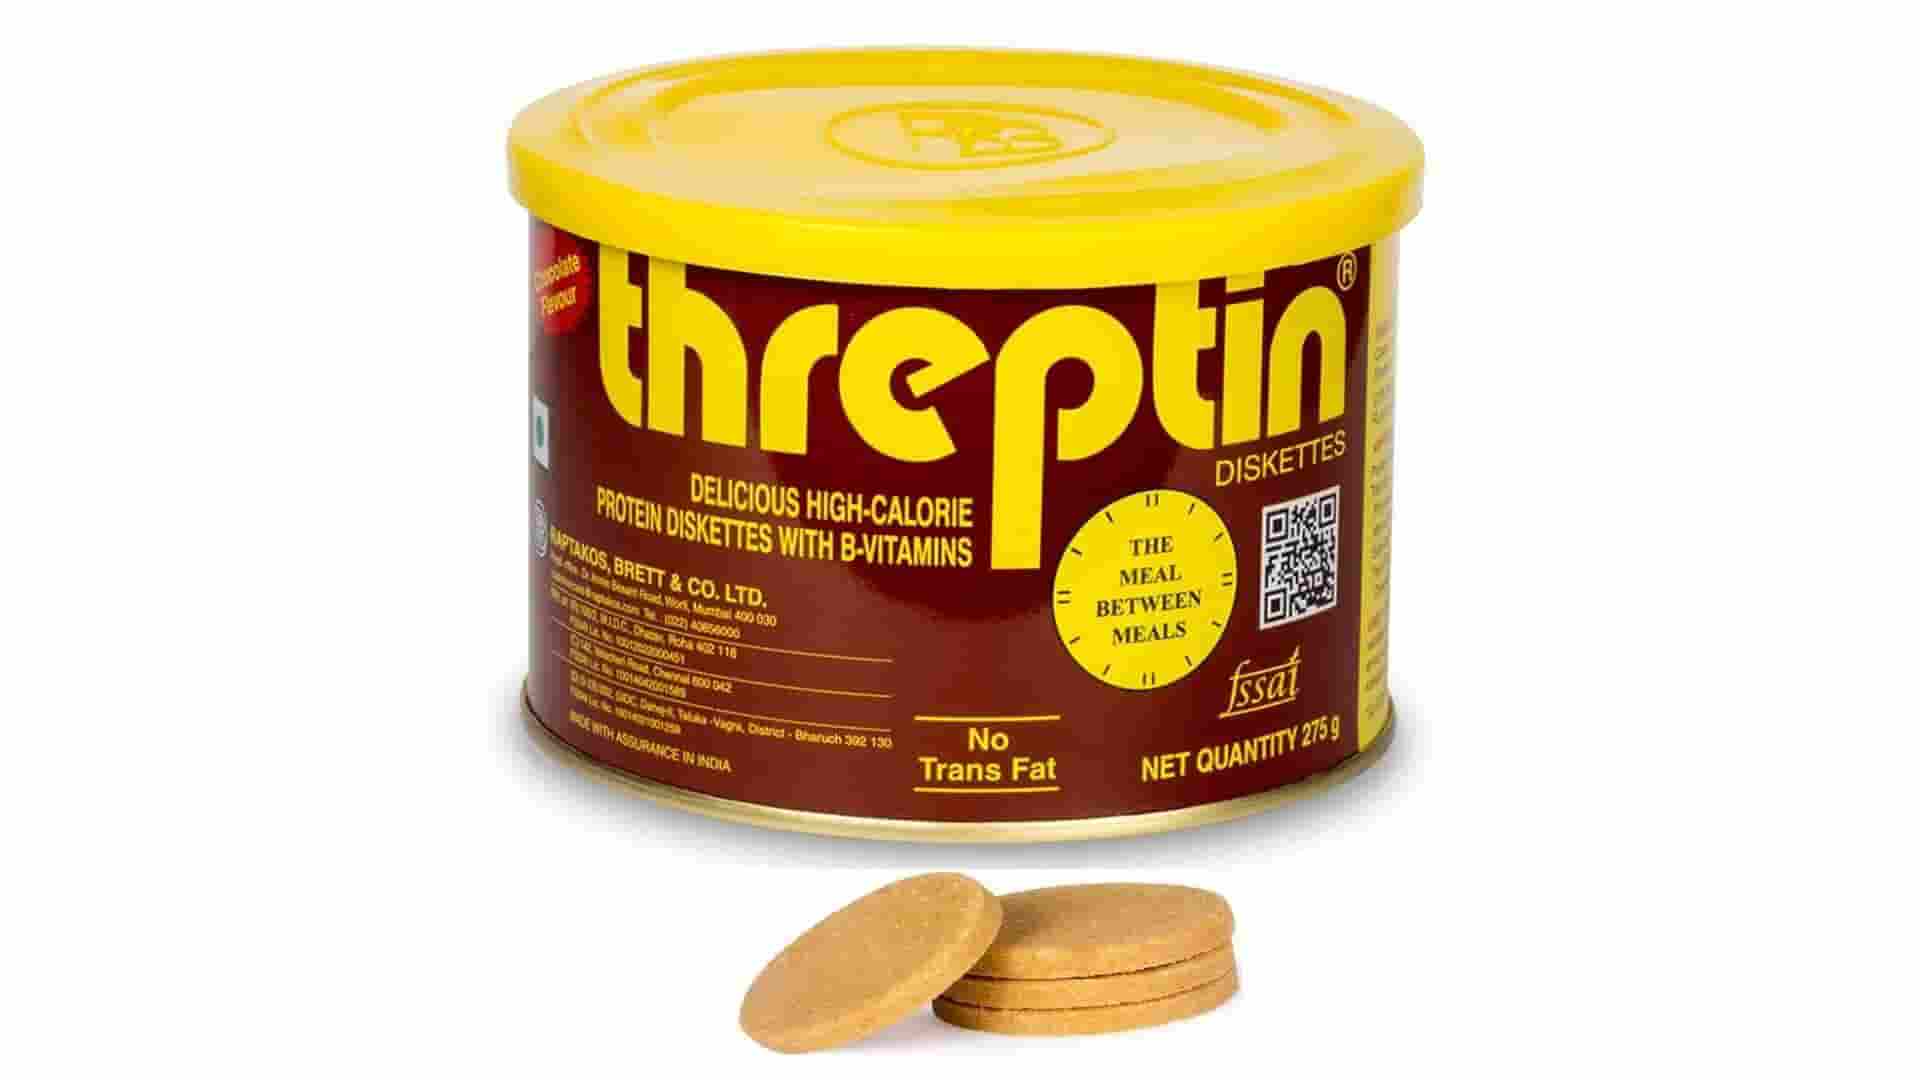 Threptin Biscuits Benefits, Side Effects, Dosage & More